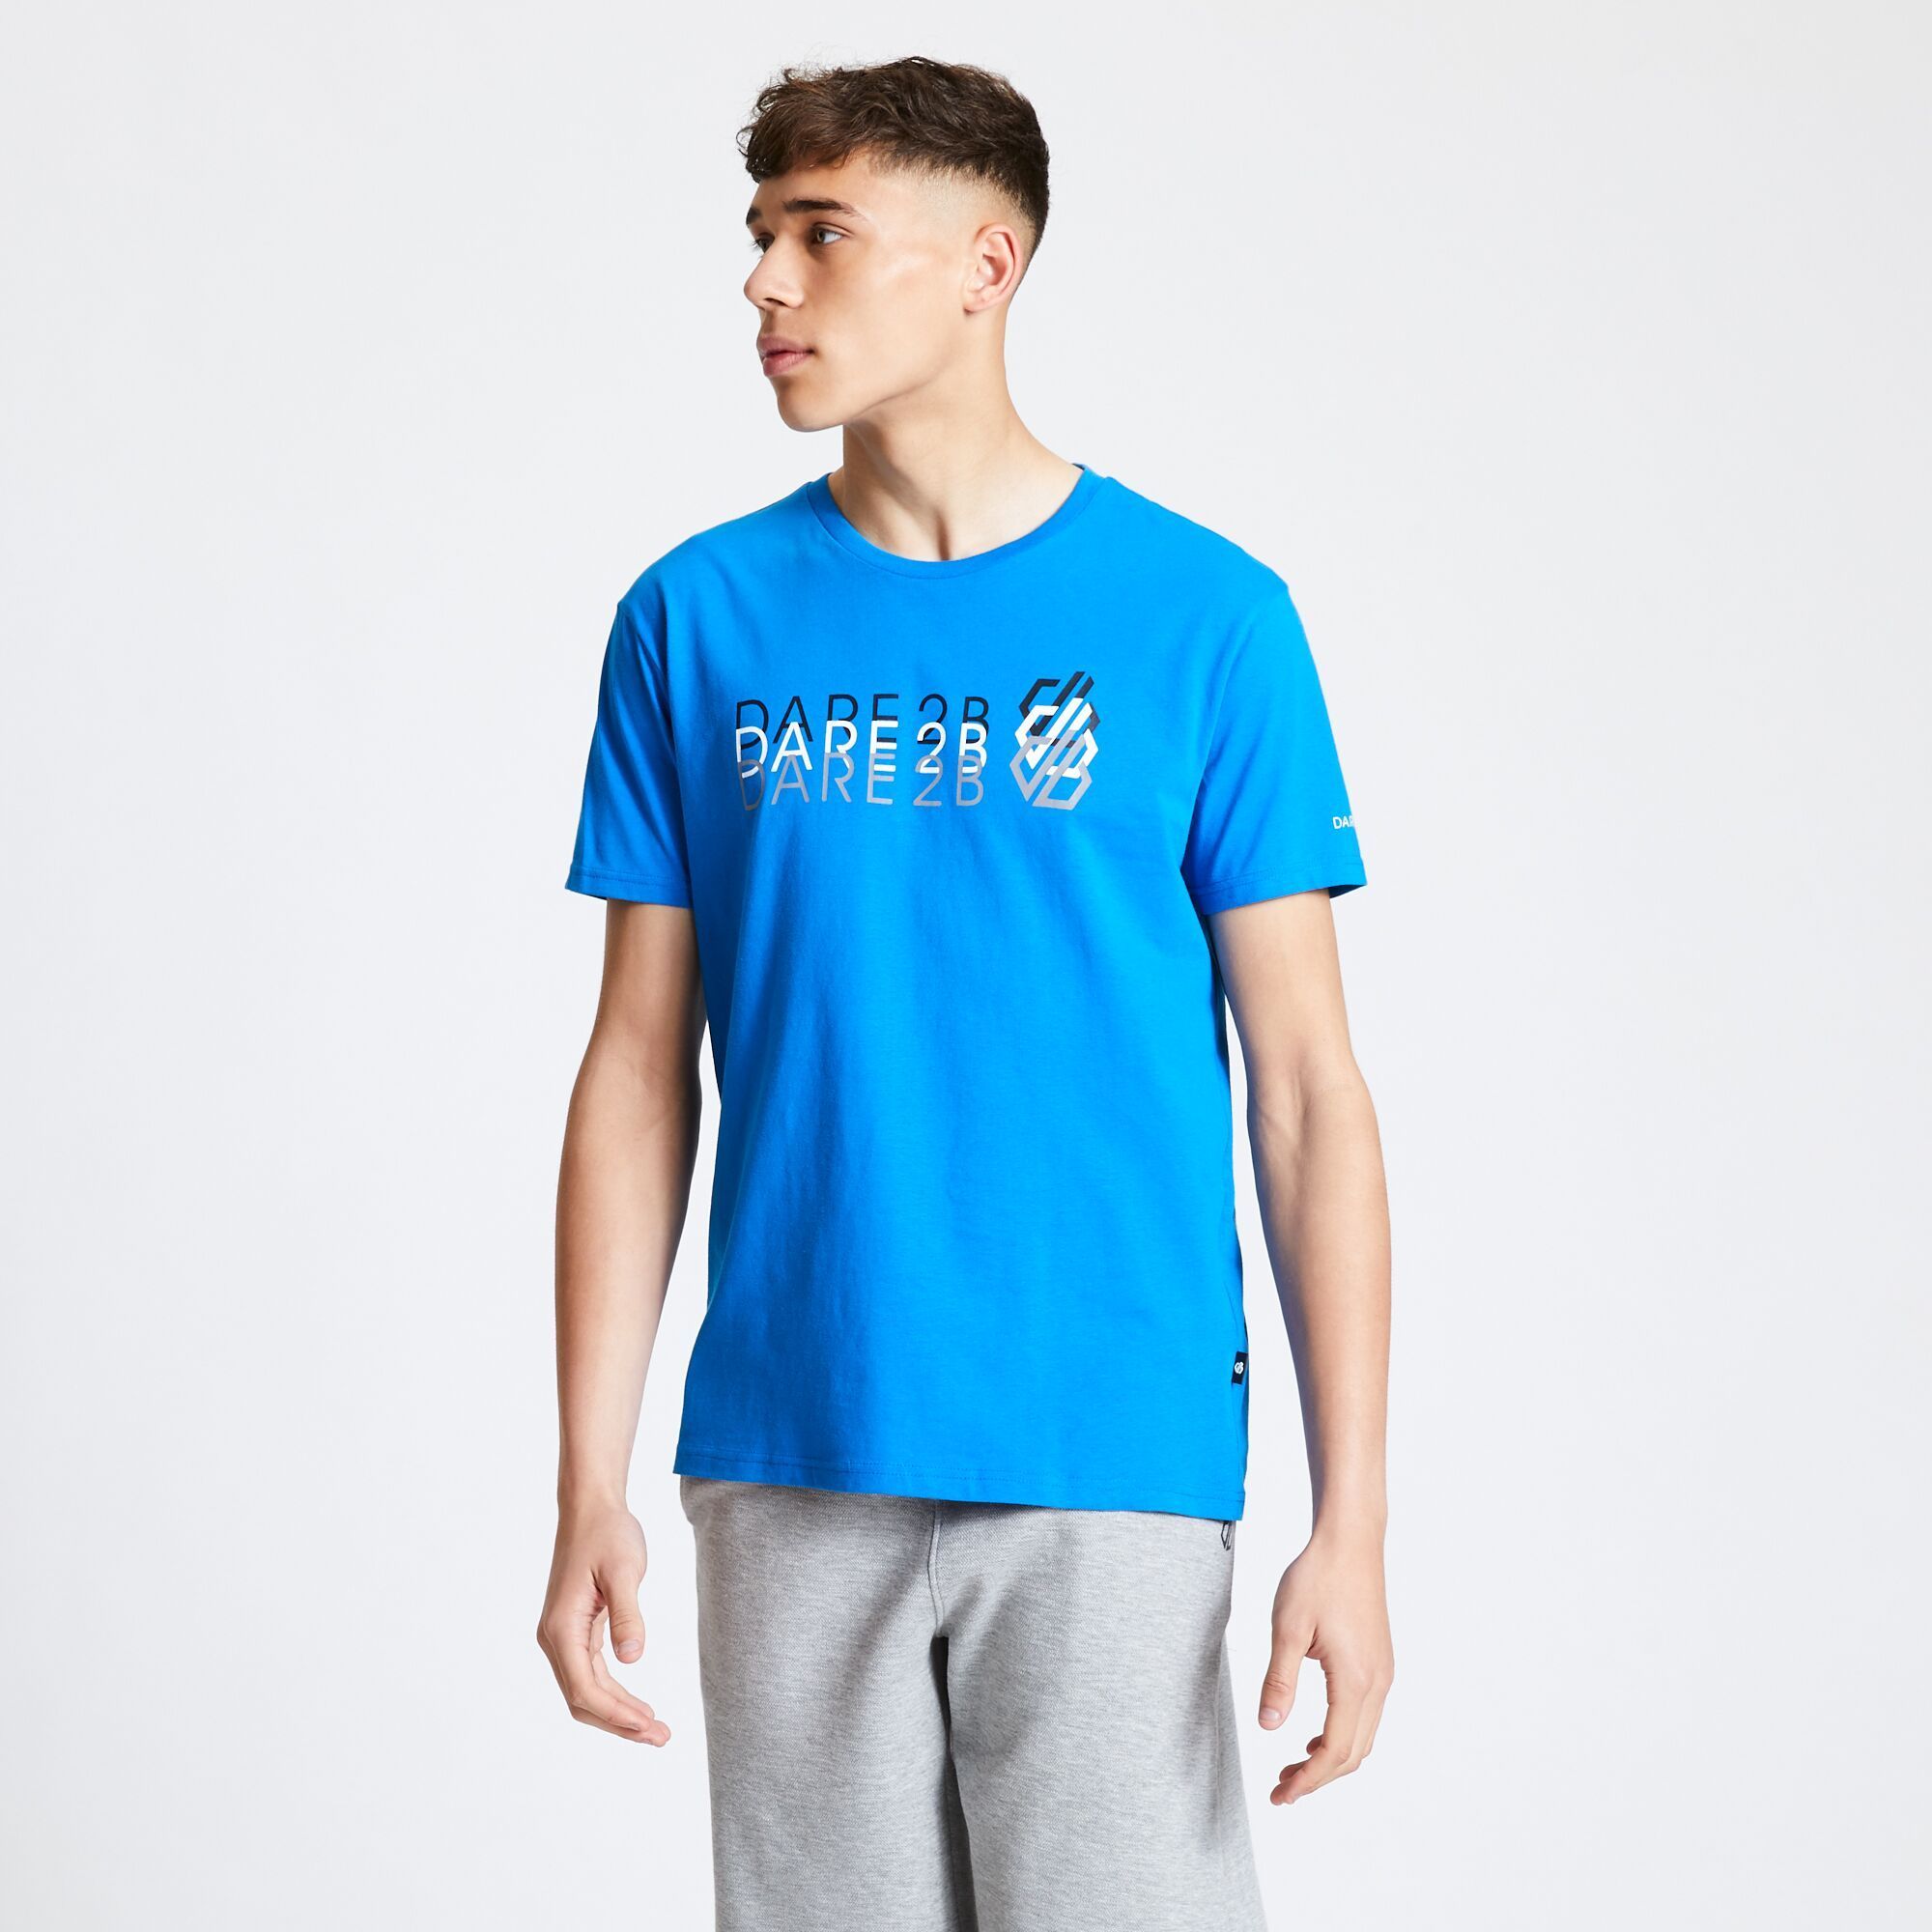 Material: 100% Cotton. Soft jersey fabric. Short sleeved with ribbed collar and round neck. Features 2 colour toned Dare 2B logo graphic print on the front.